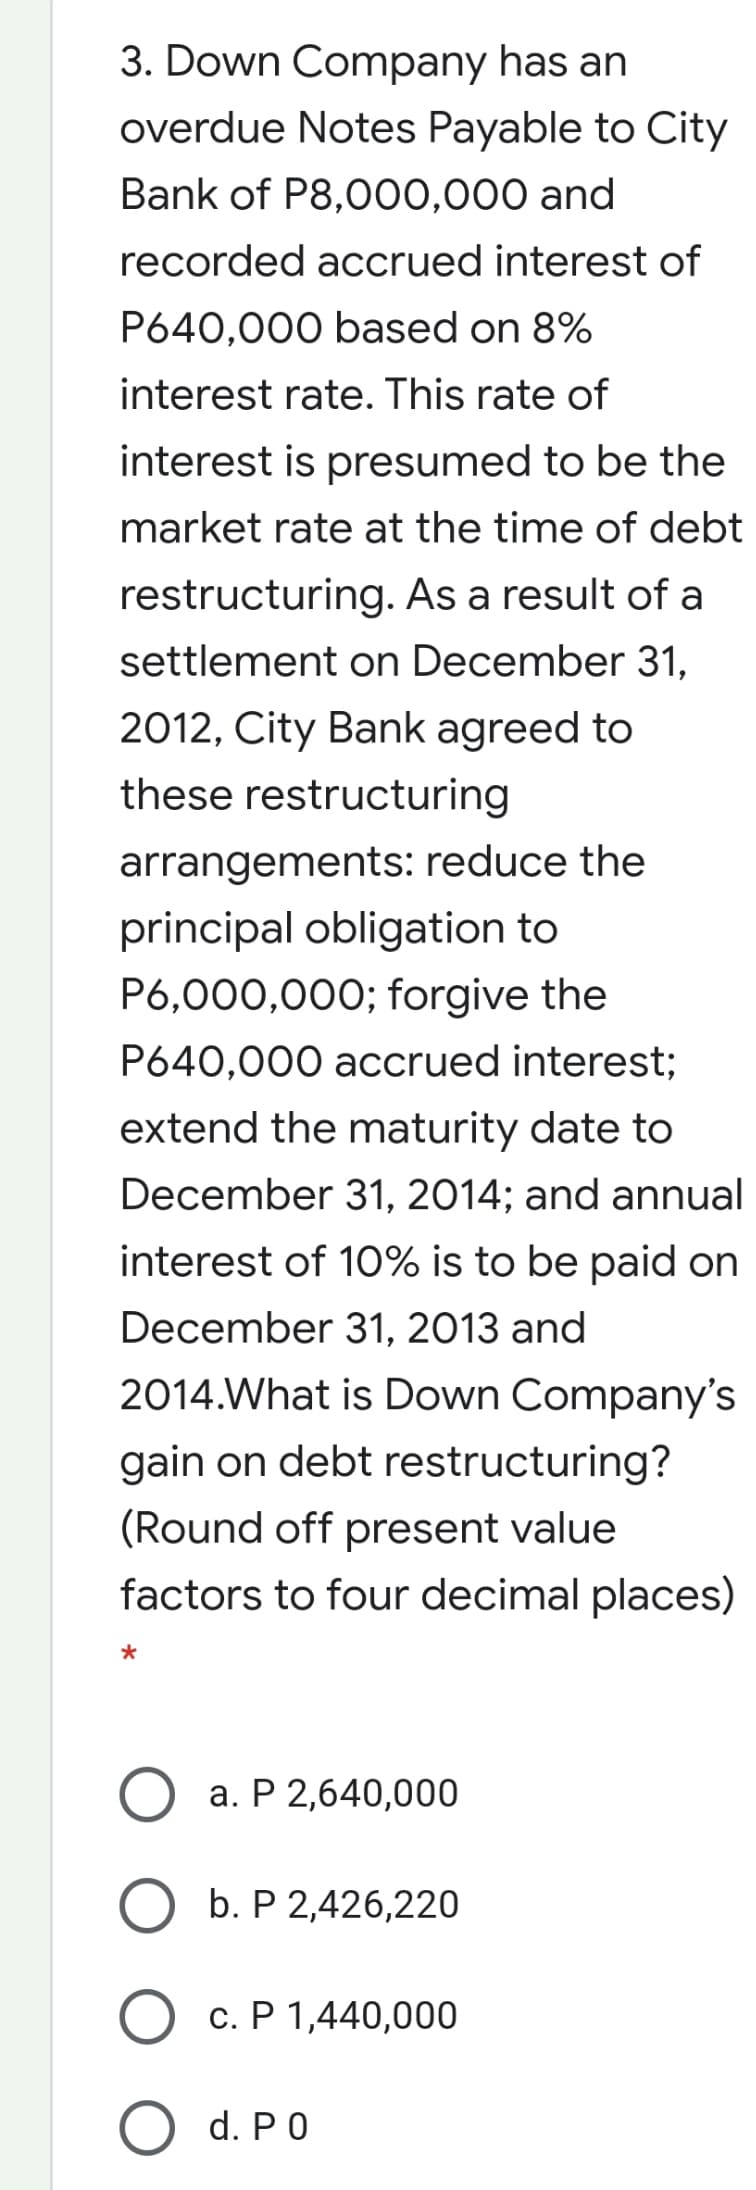 3. Down Company has an
overdue Notes Payable to City
Bank of P8,000,000 and
recorded accrued interest of
P640,000 based on 8%
interest rate. This rate of
interest is presumed to be the
market rate at the time of debt
restructuring. As a result of a
settlement on December 31,
2012, City Bank agreed to
these restructuring
arrangements: reduce the
principal obligation to
P6,000,000; forgive the
P640,000 accrued interest;
extend the maturity date to
December 31, 2014; and annual
interest of 10% is to be paid on
December 31, 2013 and
2014.What is Down Company's
gain on debt restructuring?
(Round off present value
factors to four decimal places)
a. P 2,640,000
b. P 2,426,220
c. P 1,440,000
O d. PO
